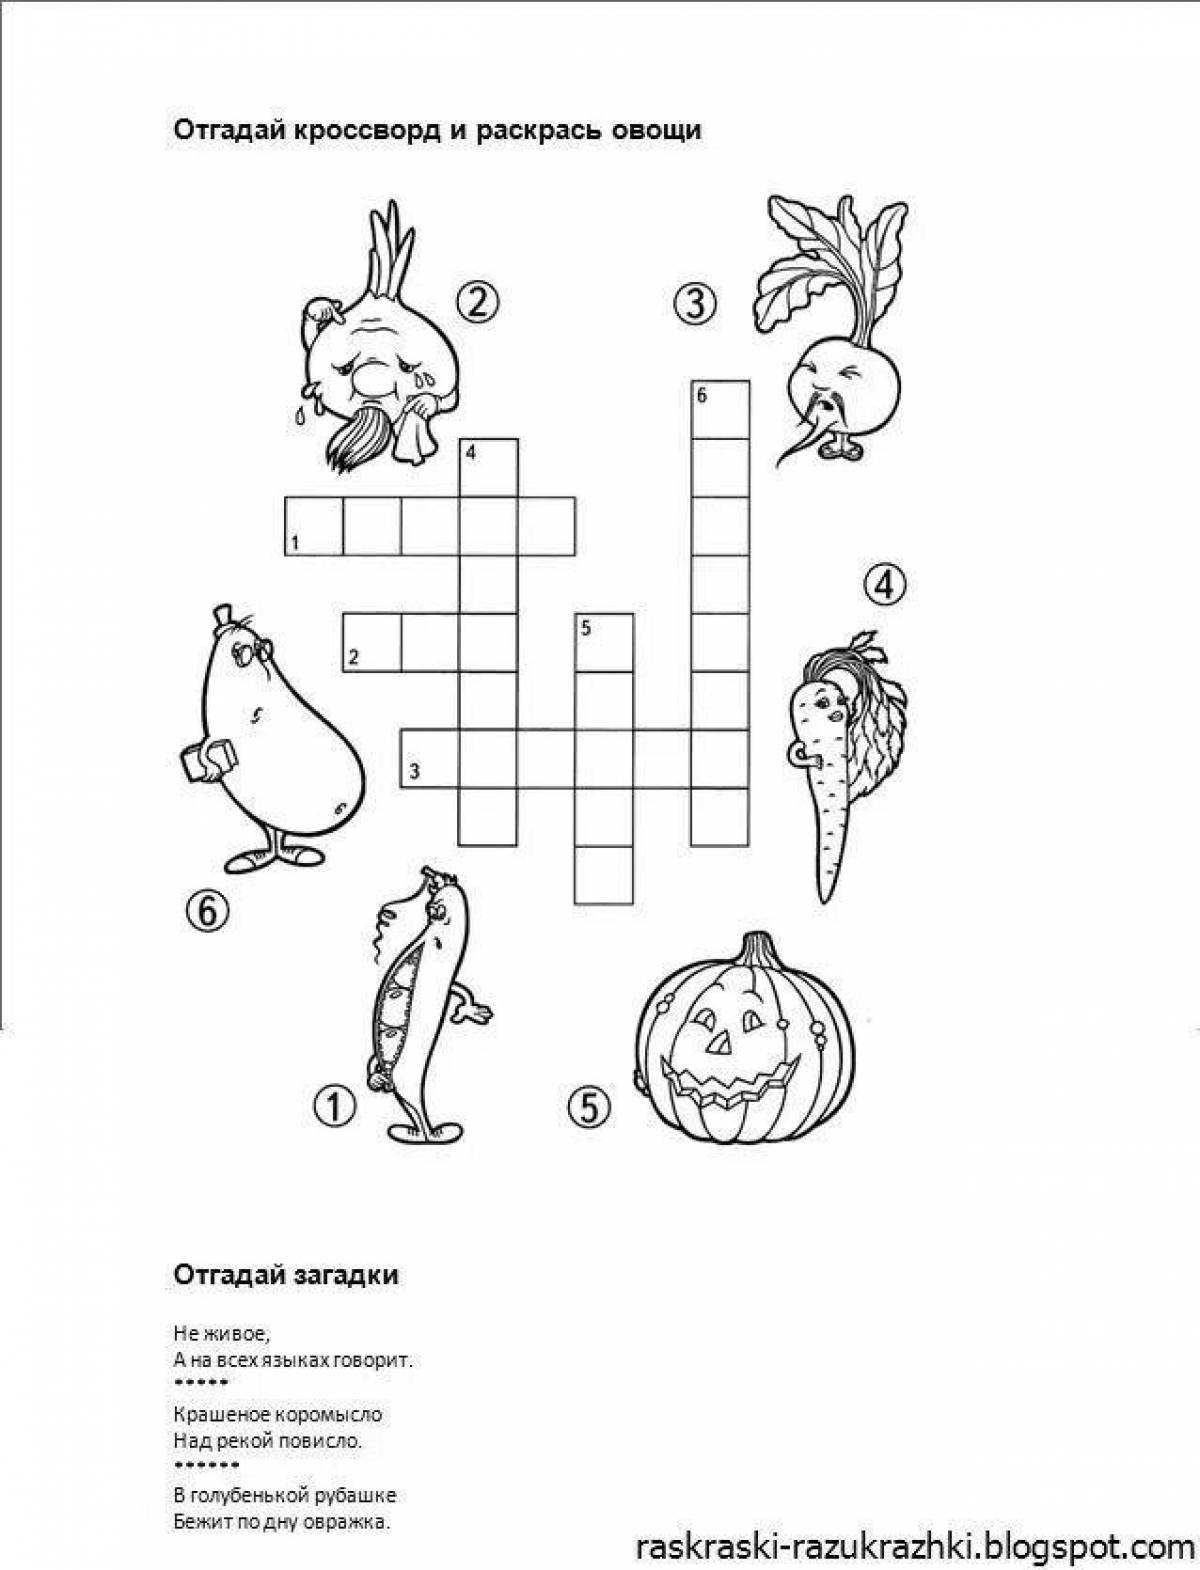 Colorful coloring crossword puzzle